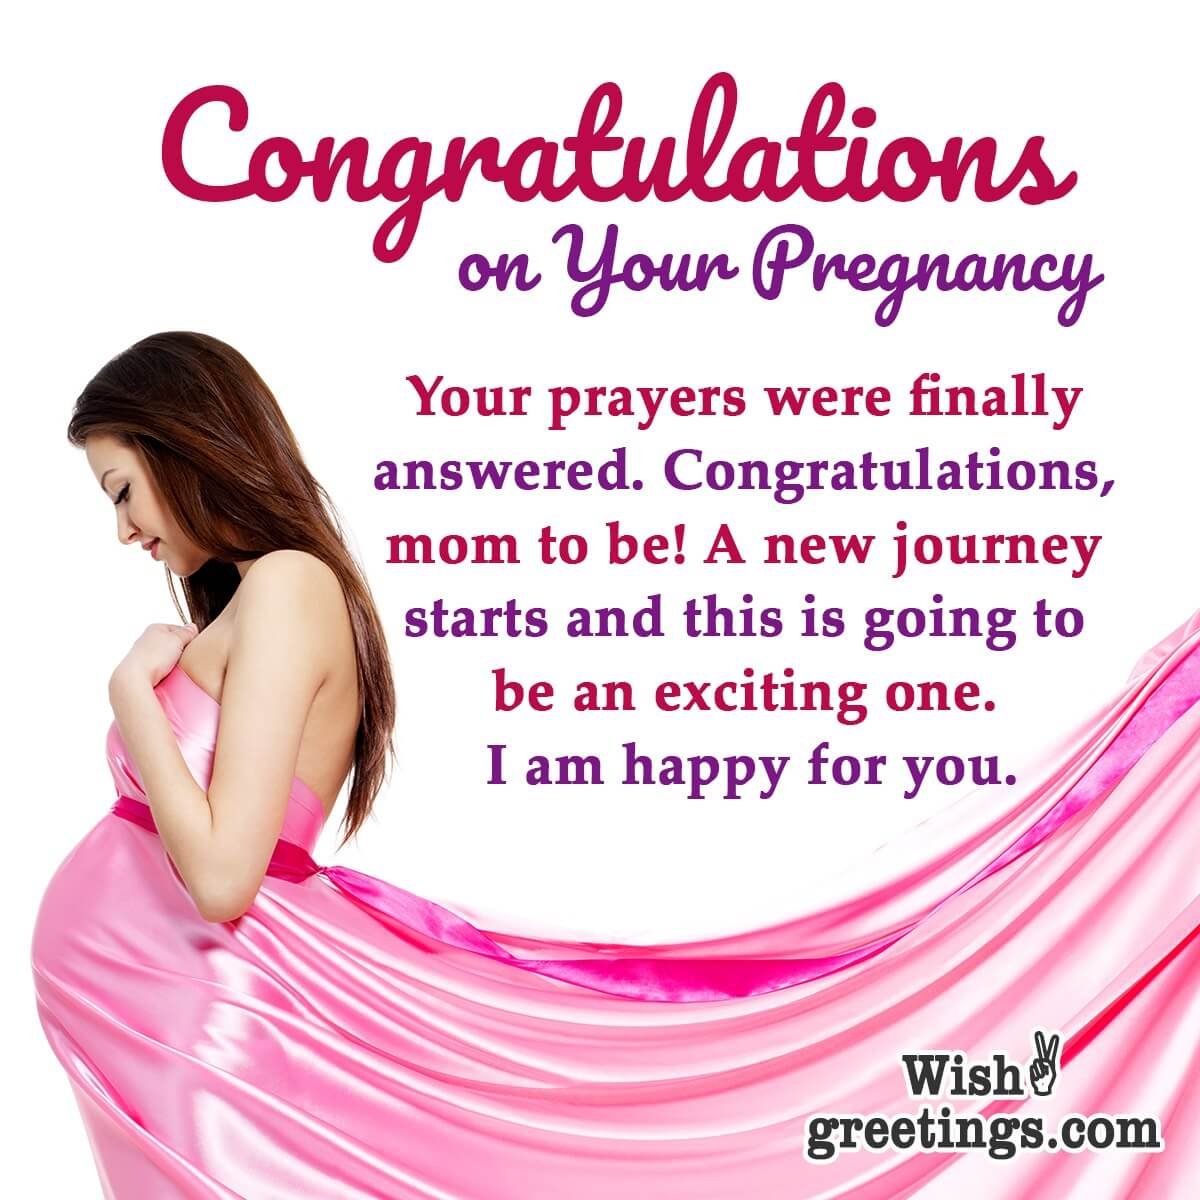 pregnancy-wishes-messages-wish-greetings